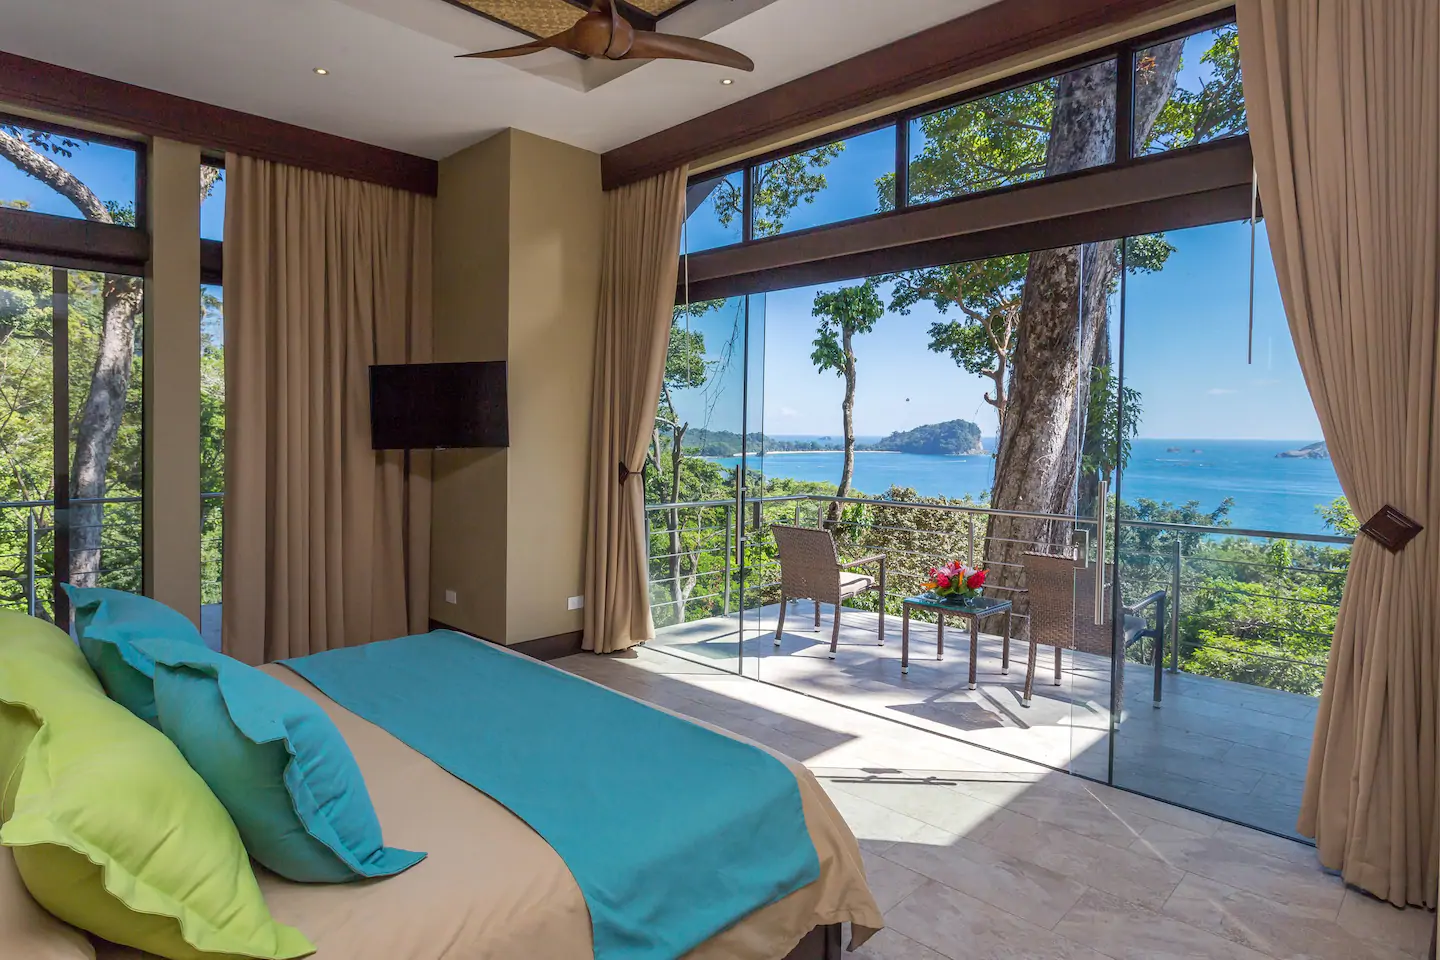 Master bedroom with beach views.

